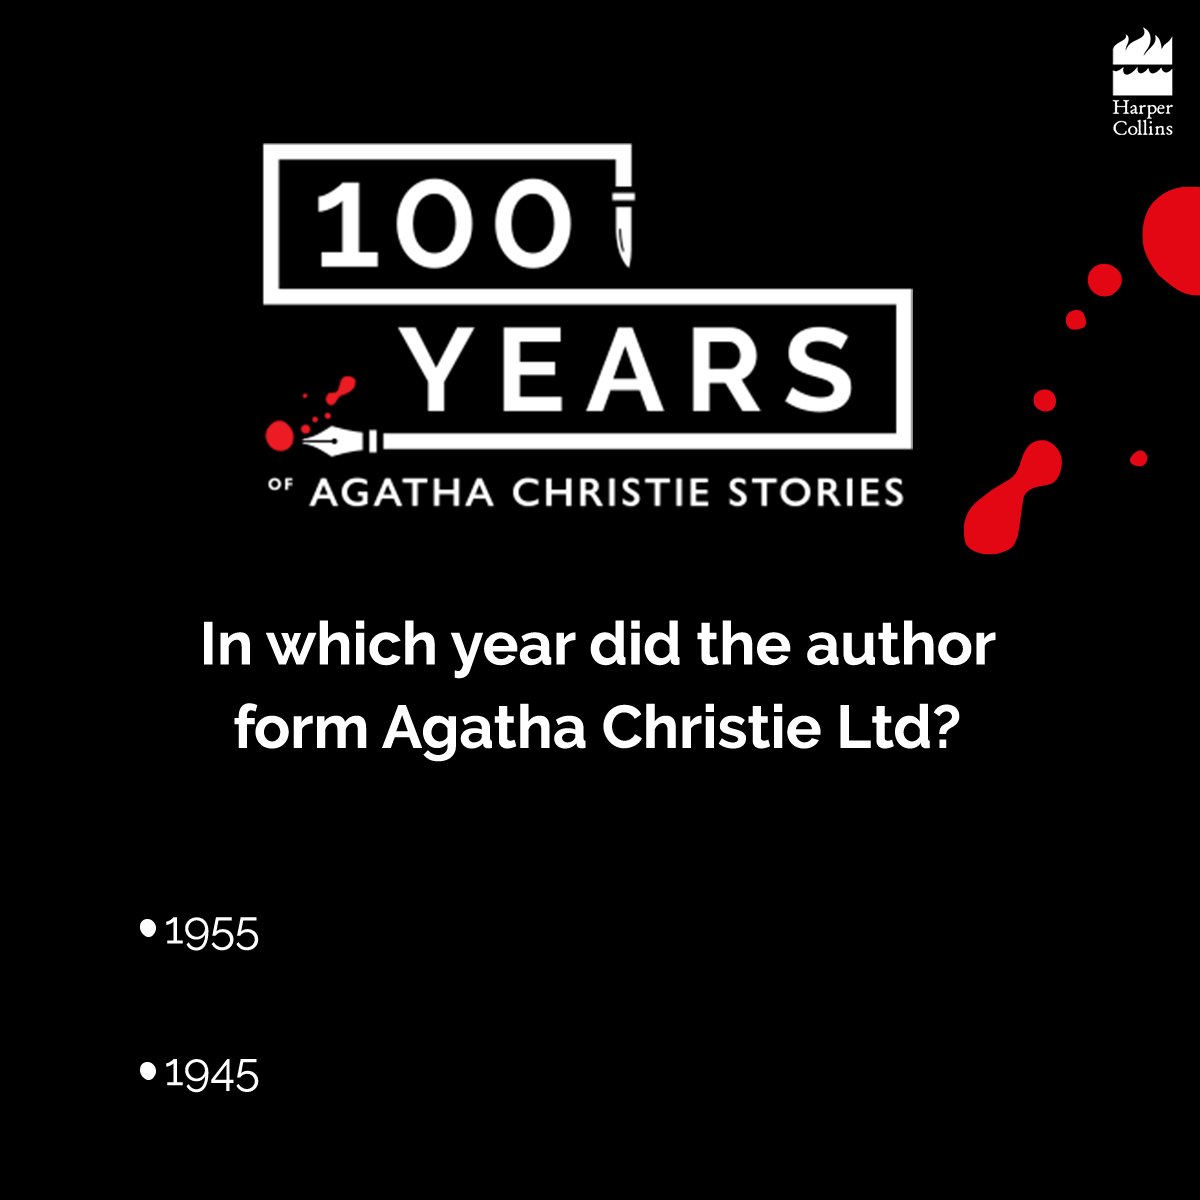 #ContestAlert
This shouldn't be hard for a true @agathachristie fan. More interesting questions coming up! #100YearsOfChristie #Quiz